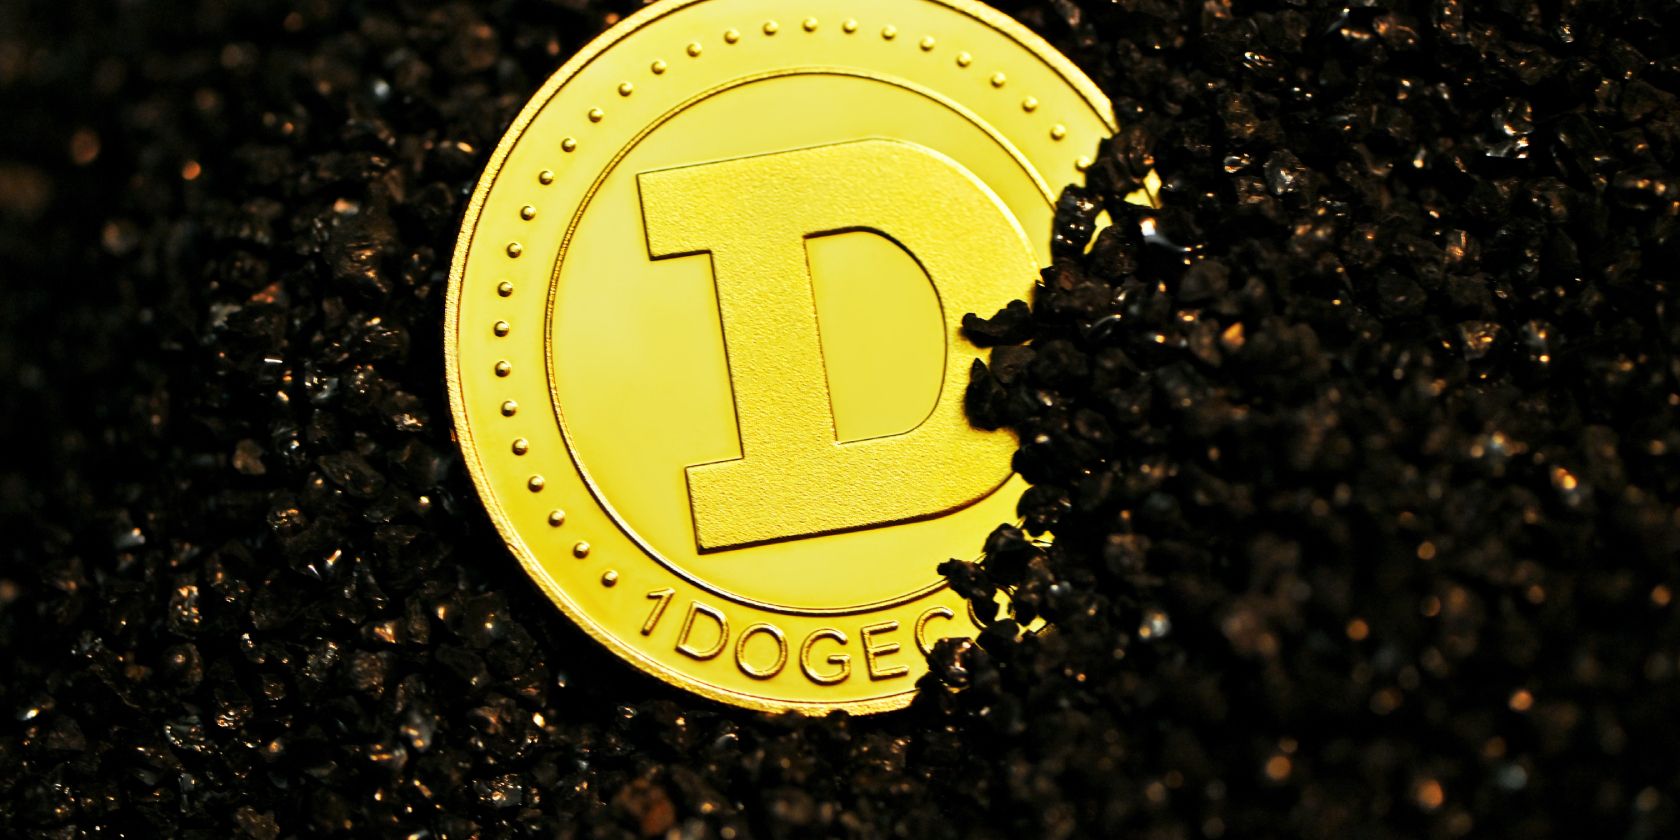 a gold dogecoin half buried in dirt